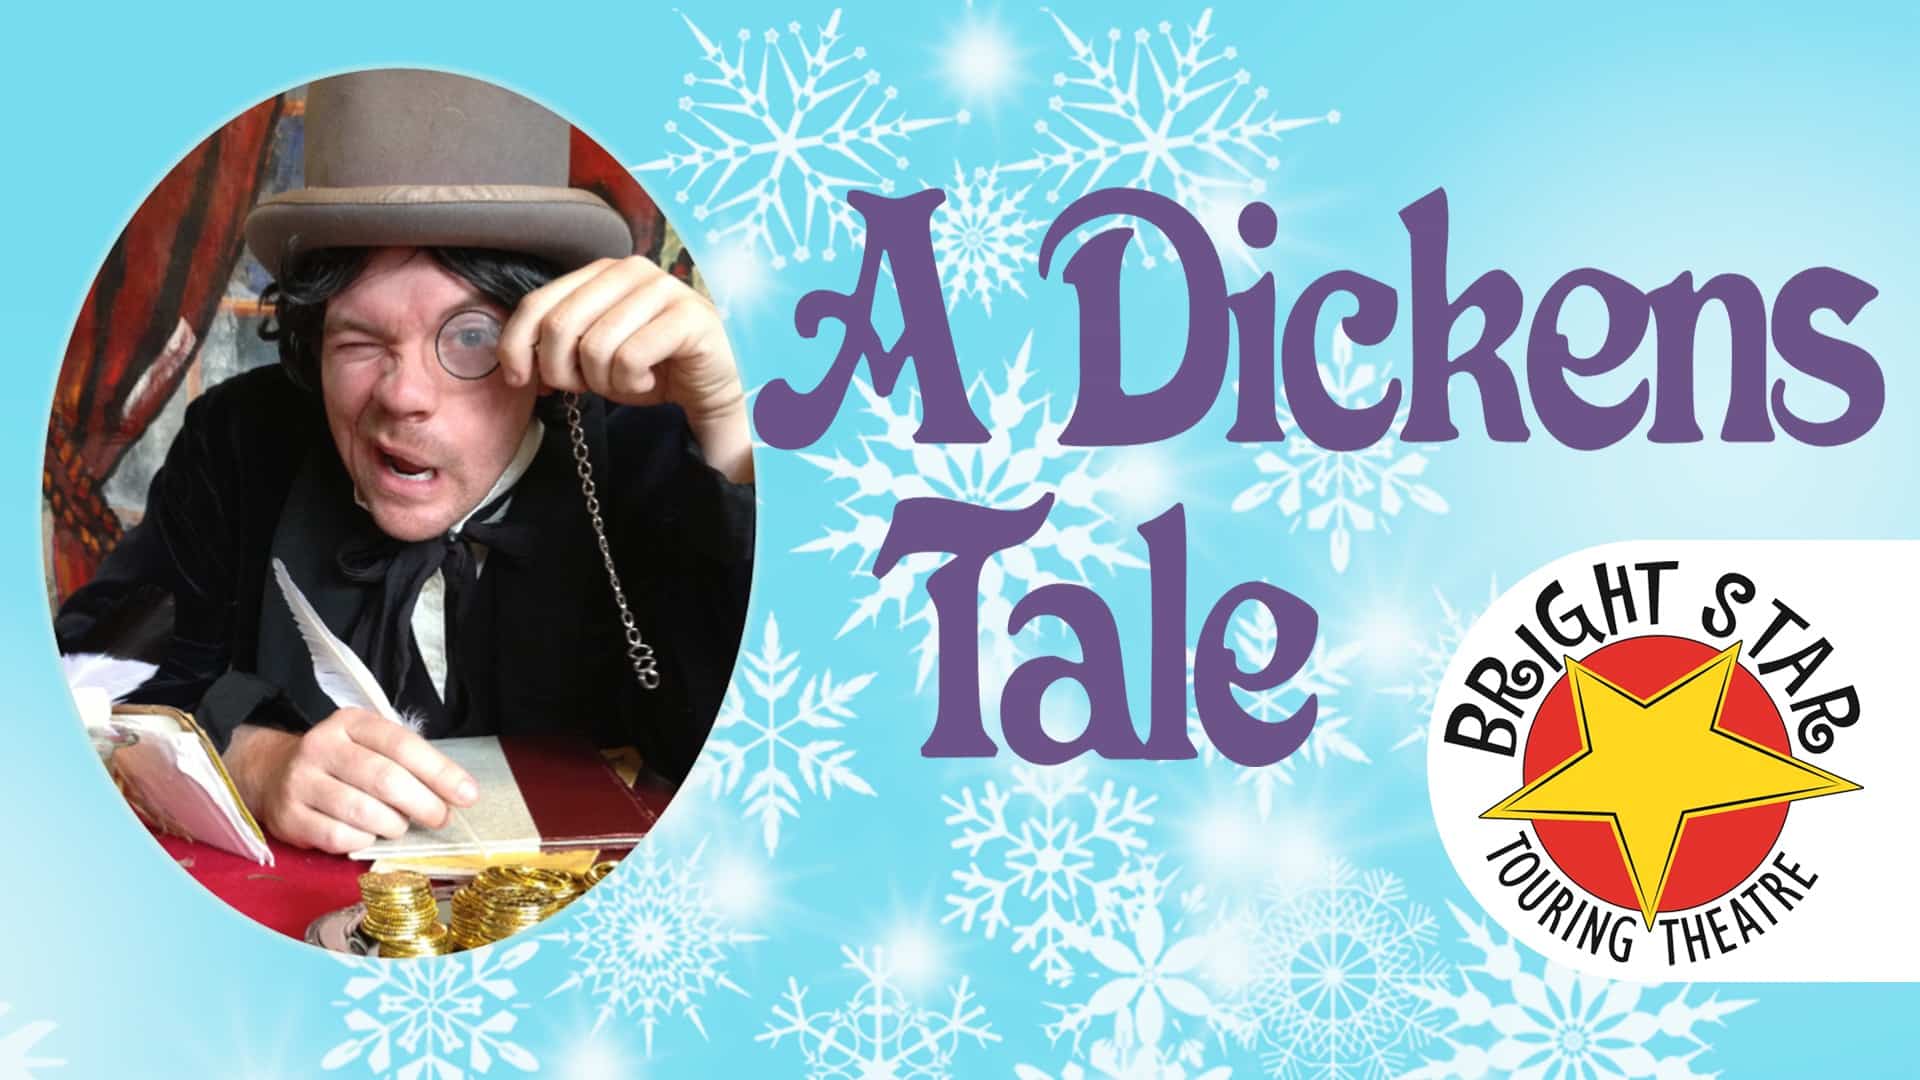 Image includes an actor portraying Ebeneezer Scrooge and the Bright Star Touring Theater logo on top of a snowflake background. Text reads "A Dickens Tale."